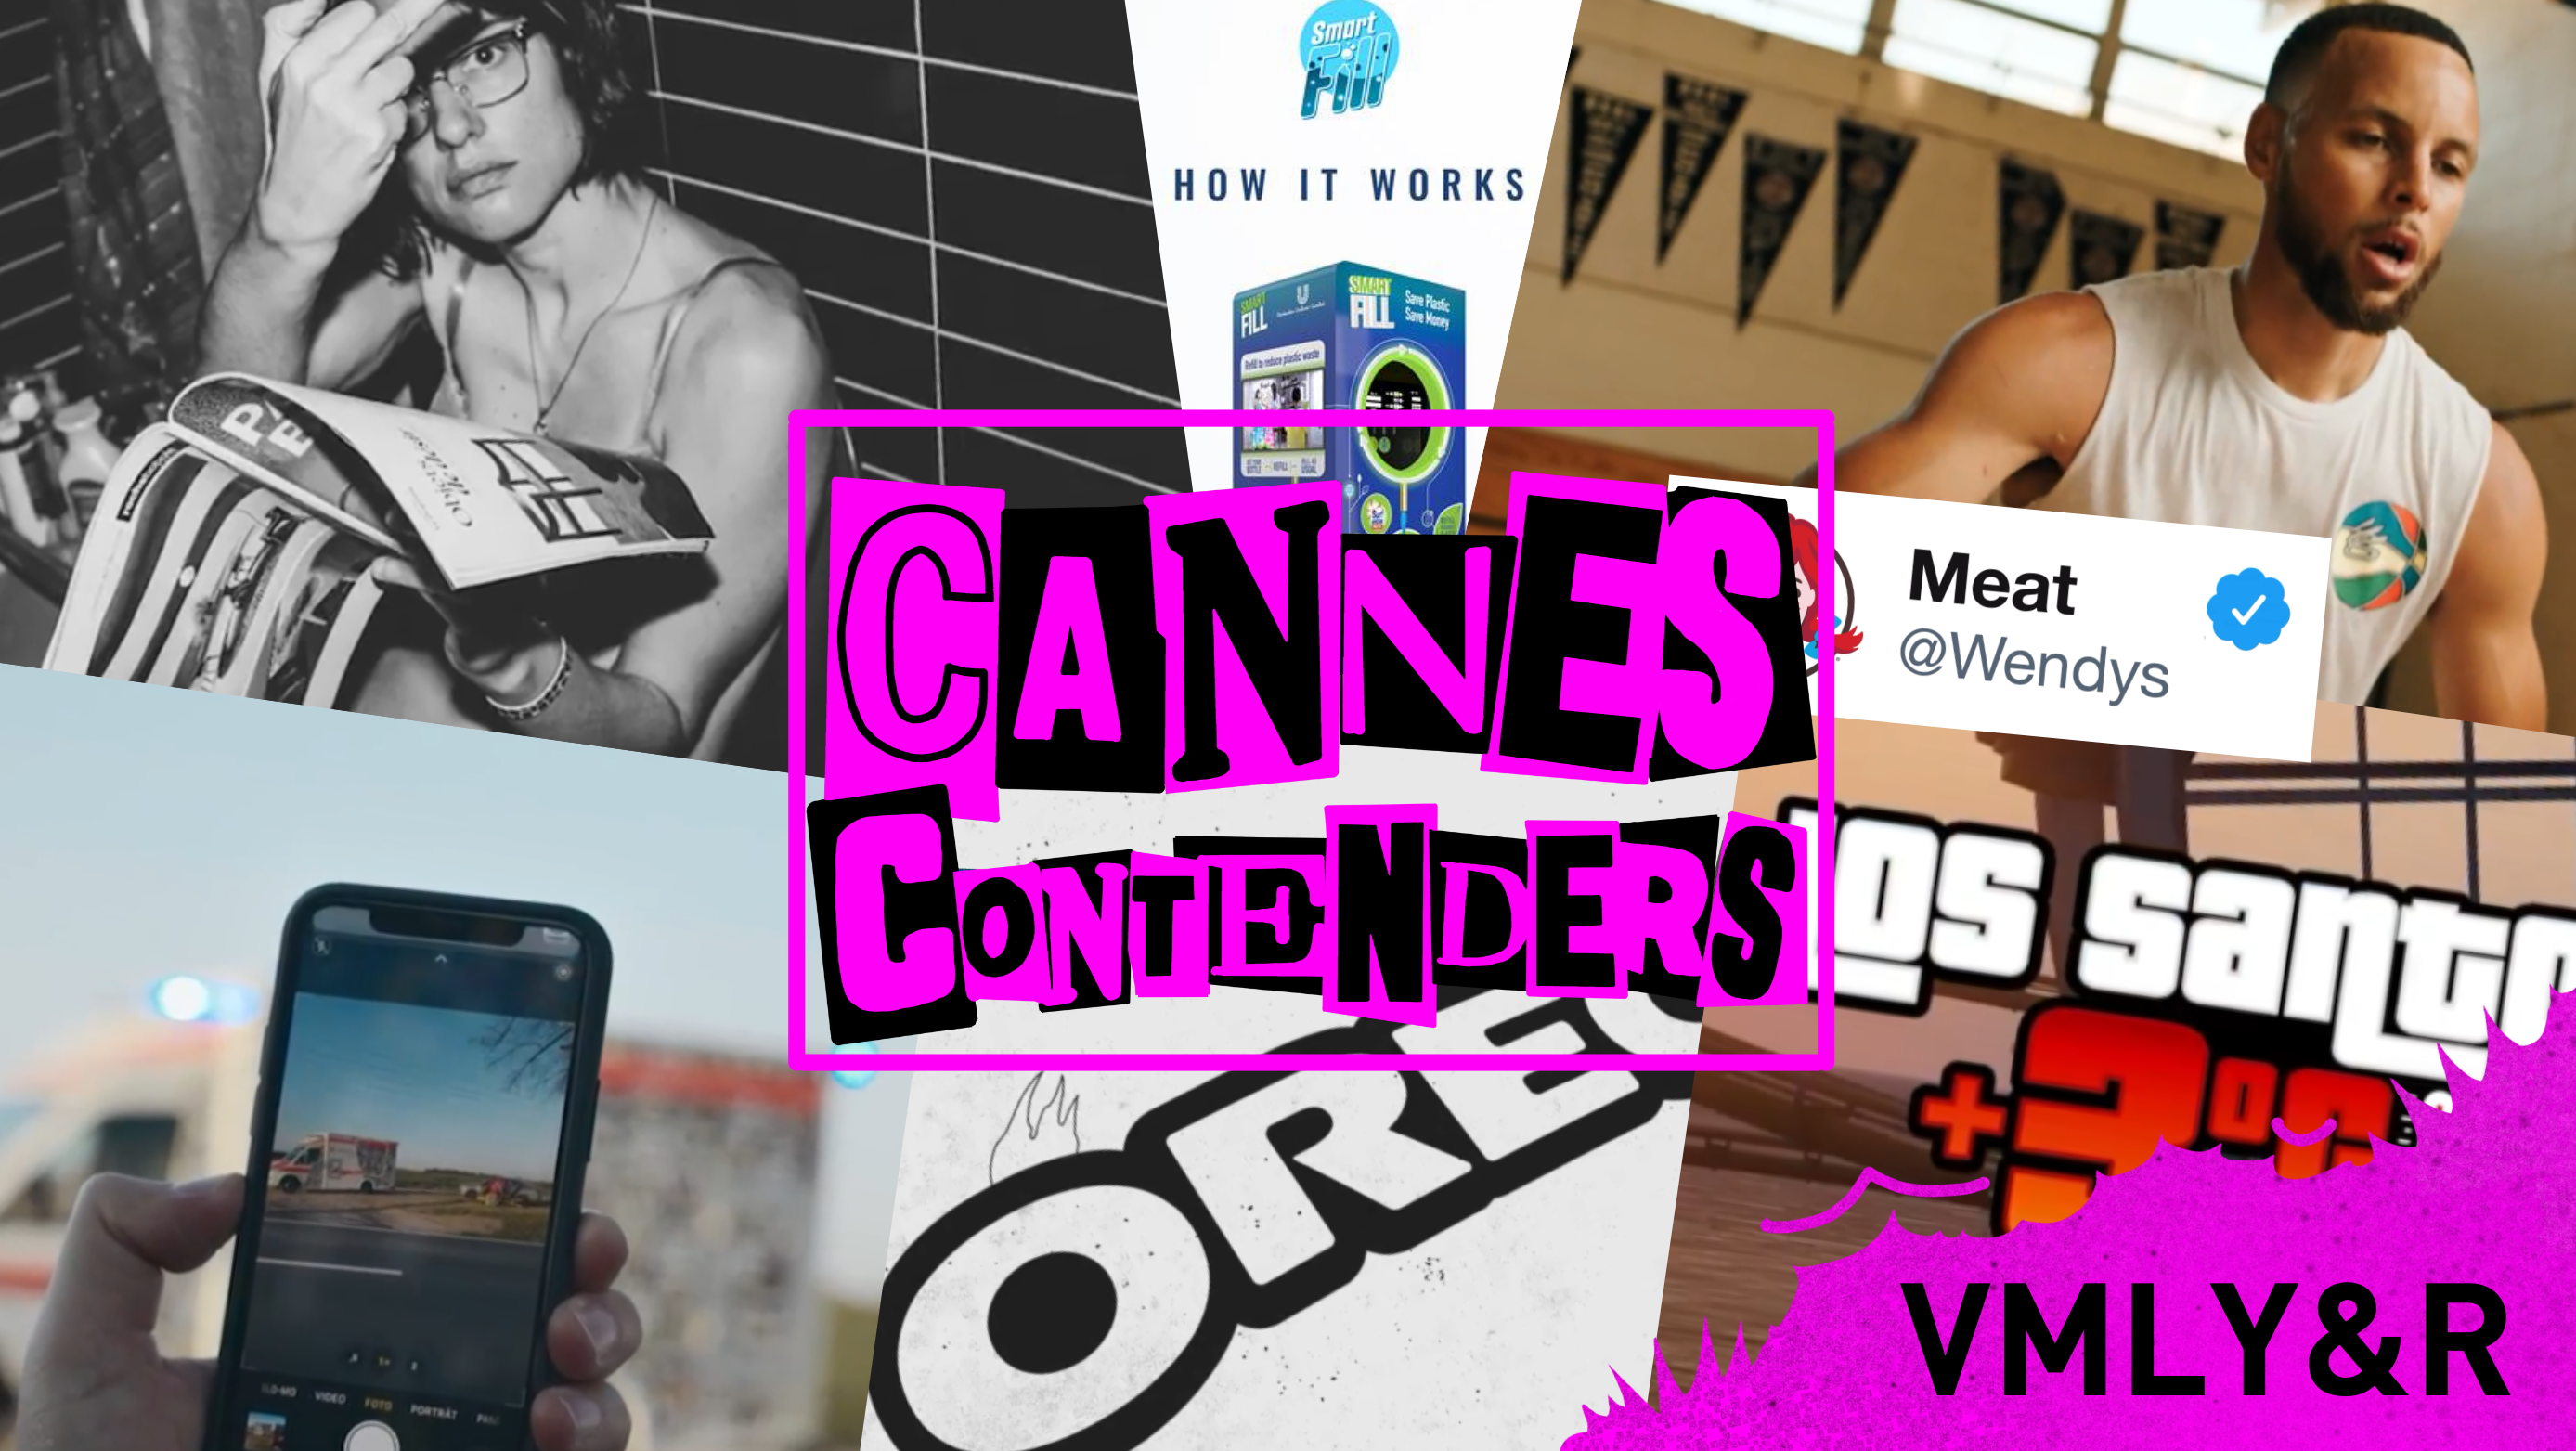 Cannes Contenders: 10 of VMLY&R’s Award Show Aspirations